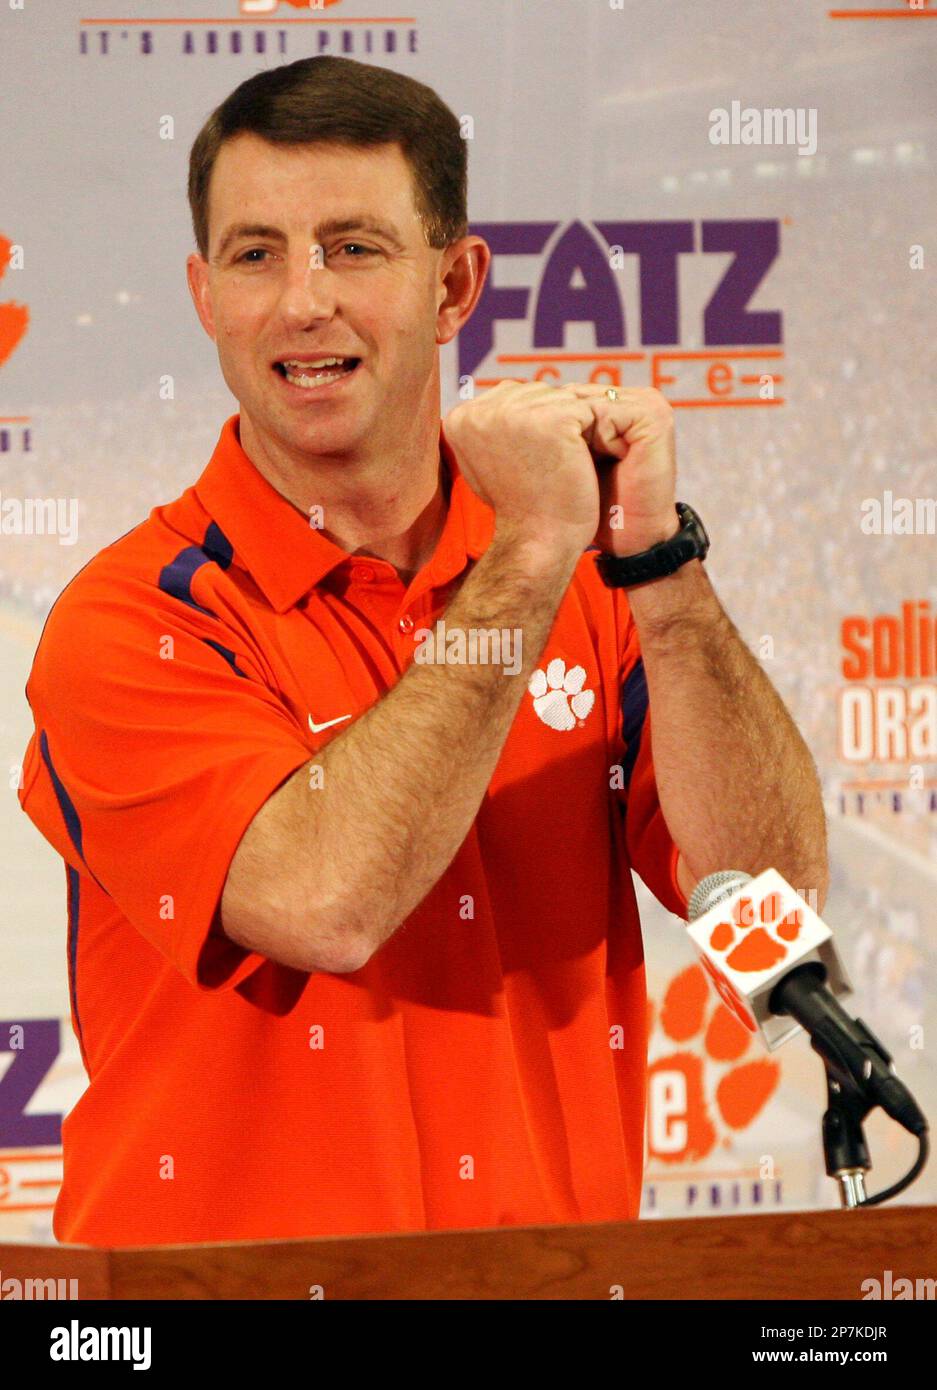 Clemson football coach Dabo Swinney discusses the NCAA college football team's signing-day class, during a news conference Wednesday, Feb. 3, 2010, in Clemson, S.C. (AP Photo/Anderson Independent-Mail, Mark Crammer) Foto Stock